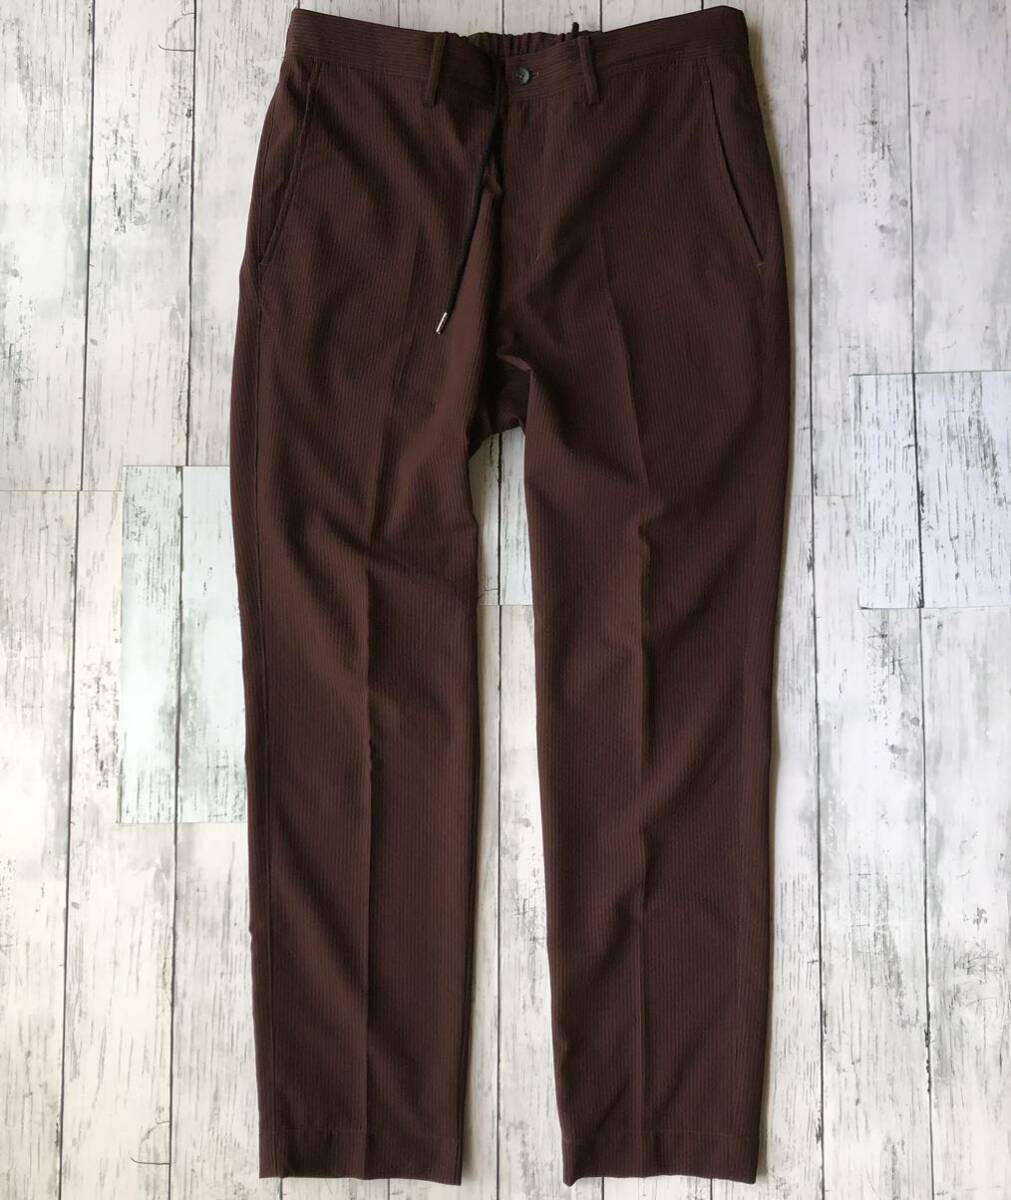  beautiful goods /L size / laundry possibility /sia soccer *417 Edifice EDIFICE suit setup polyester travel Easy tailored Brown 